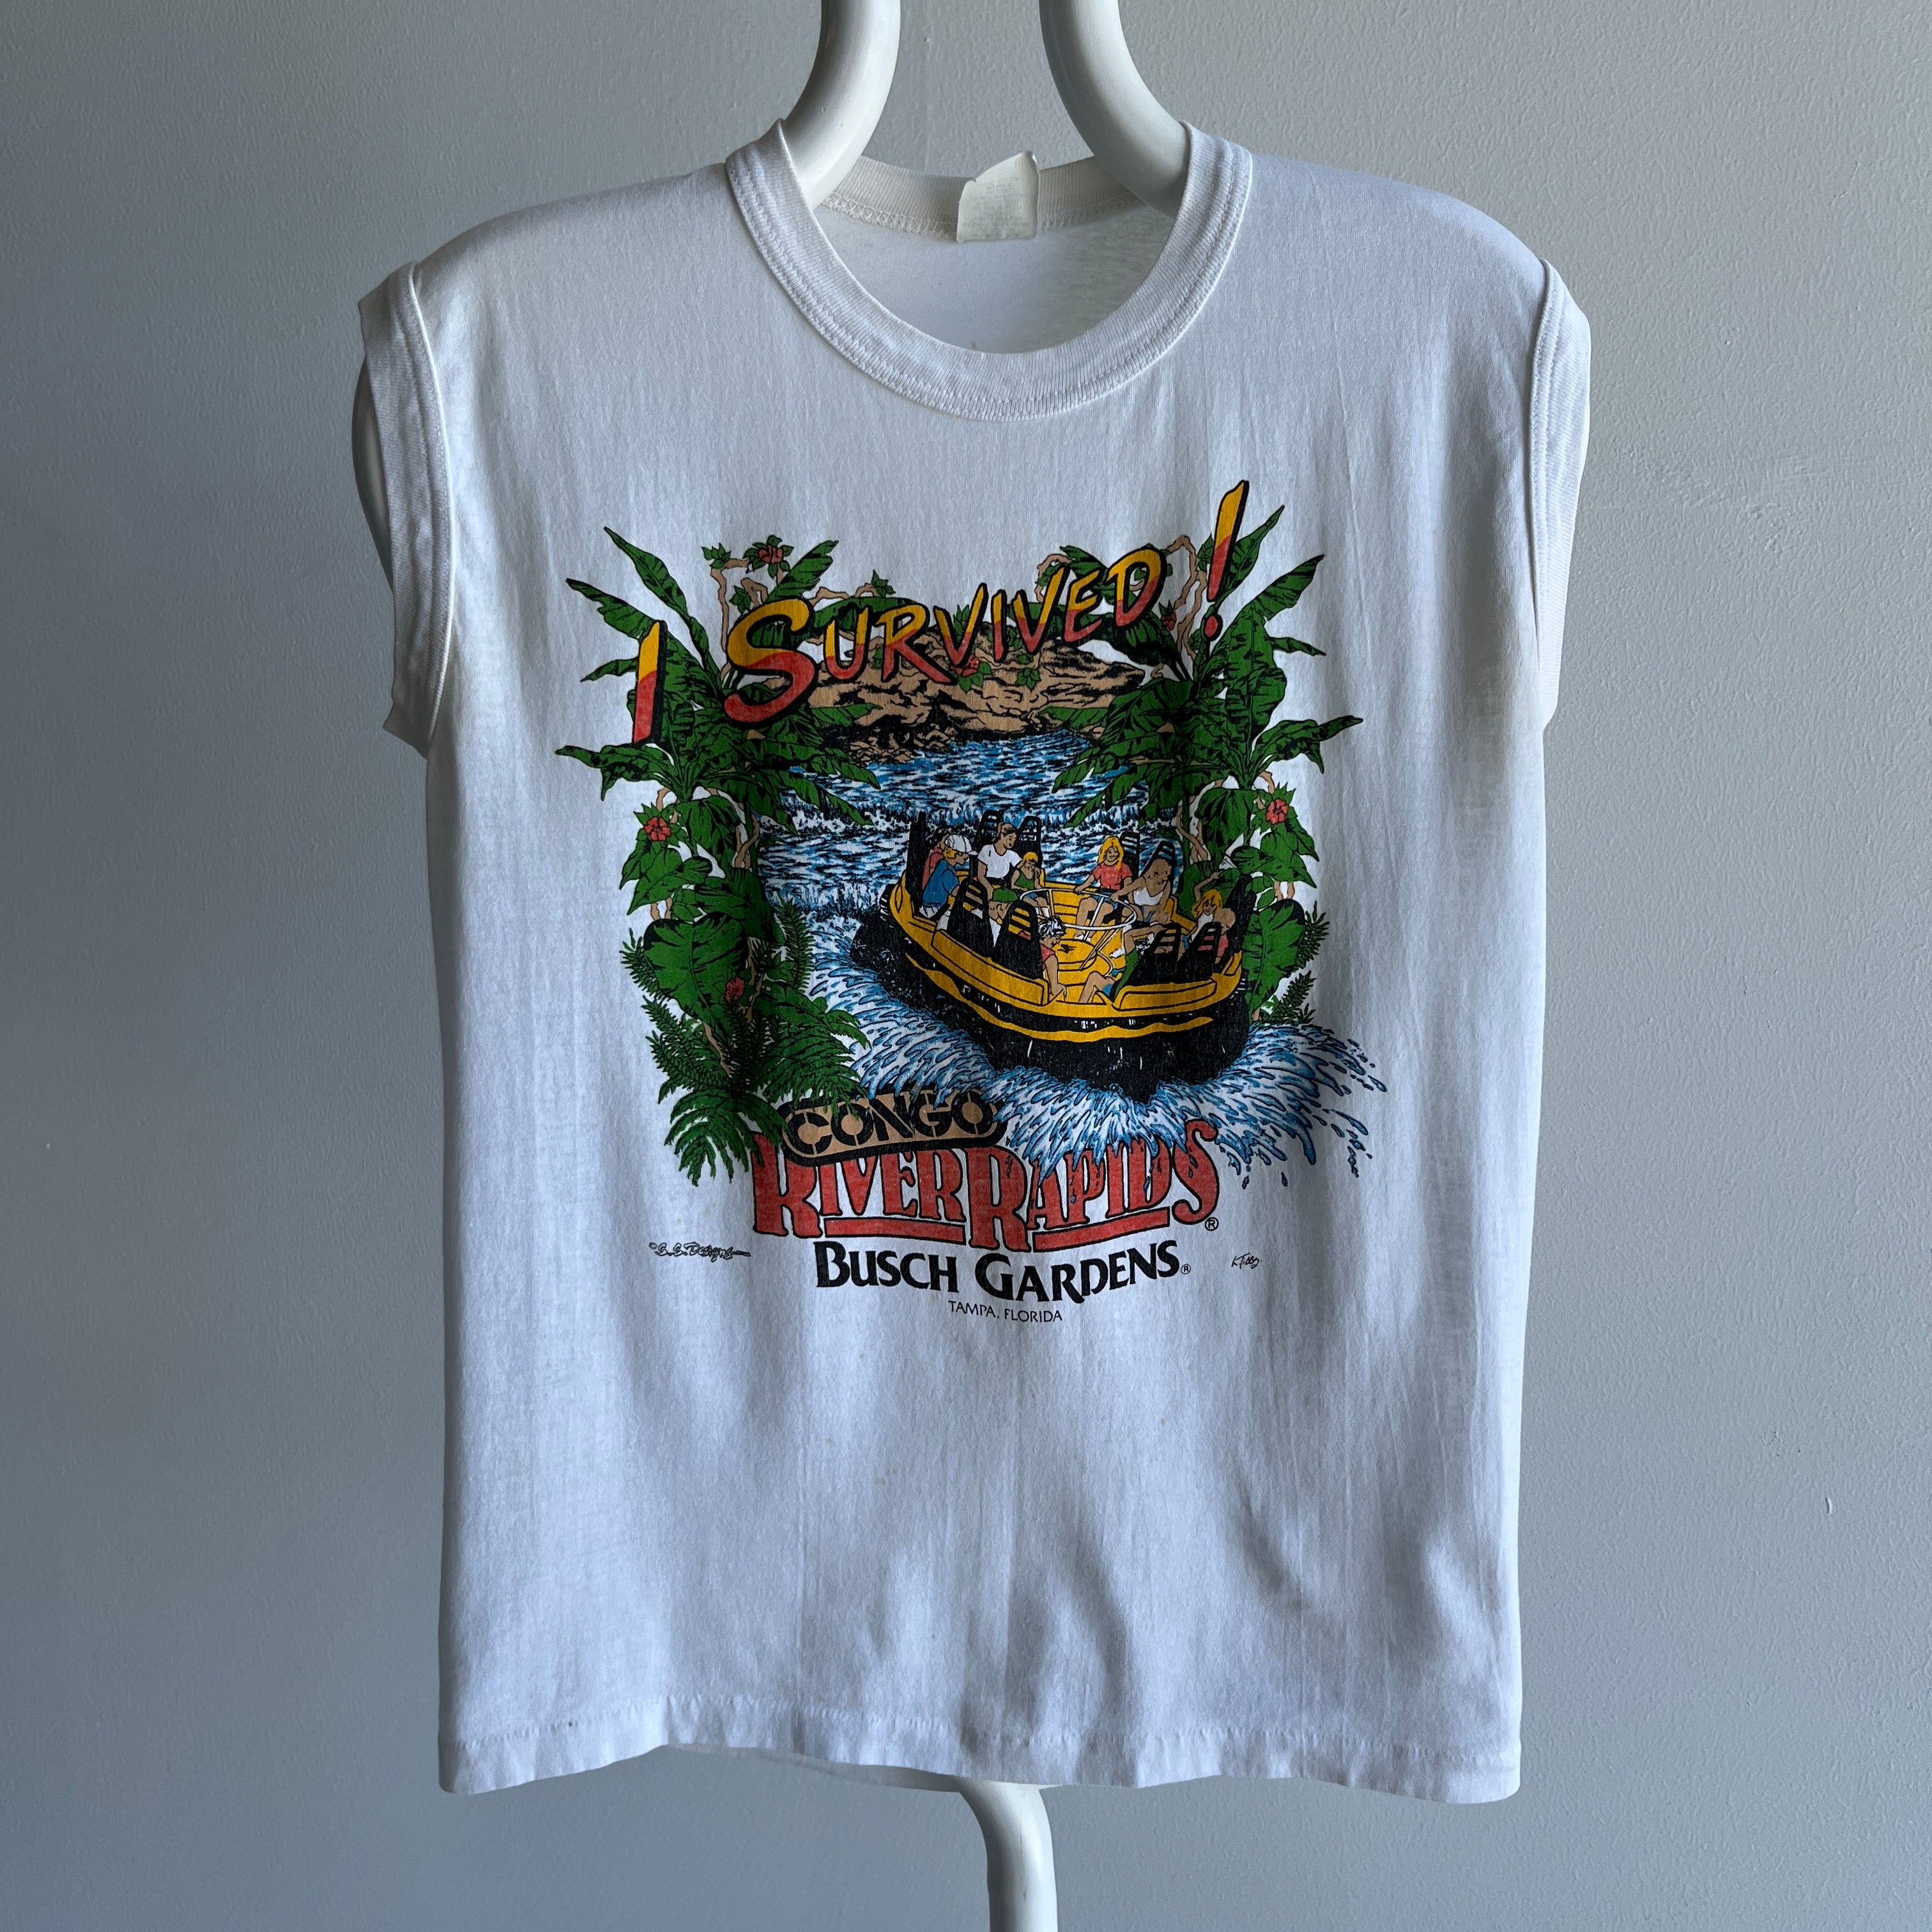 1980s I Survived Busch Gardens Congo Rover Rapids Muscle Tank